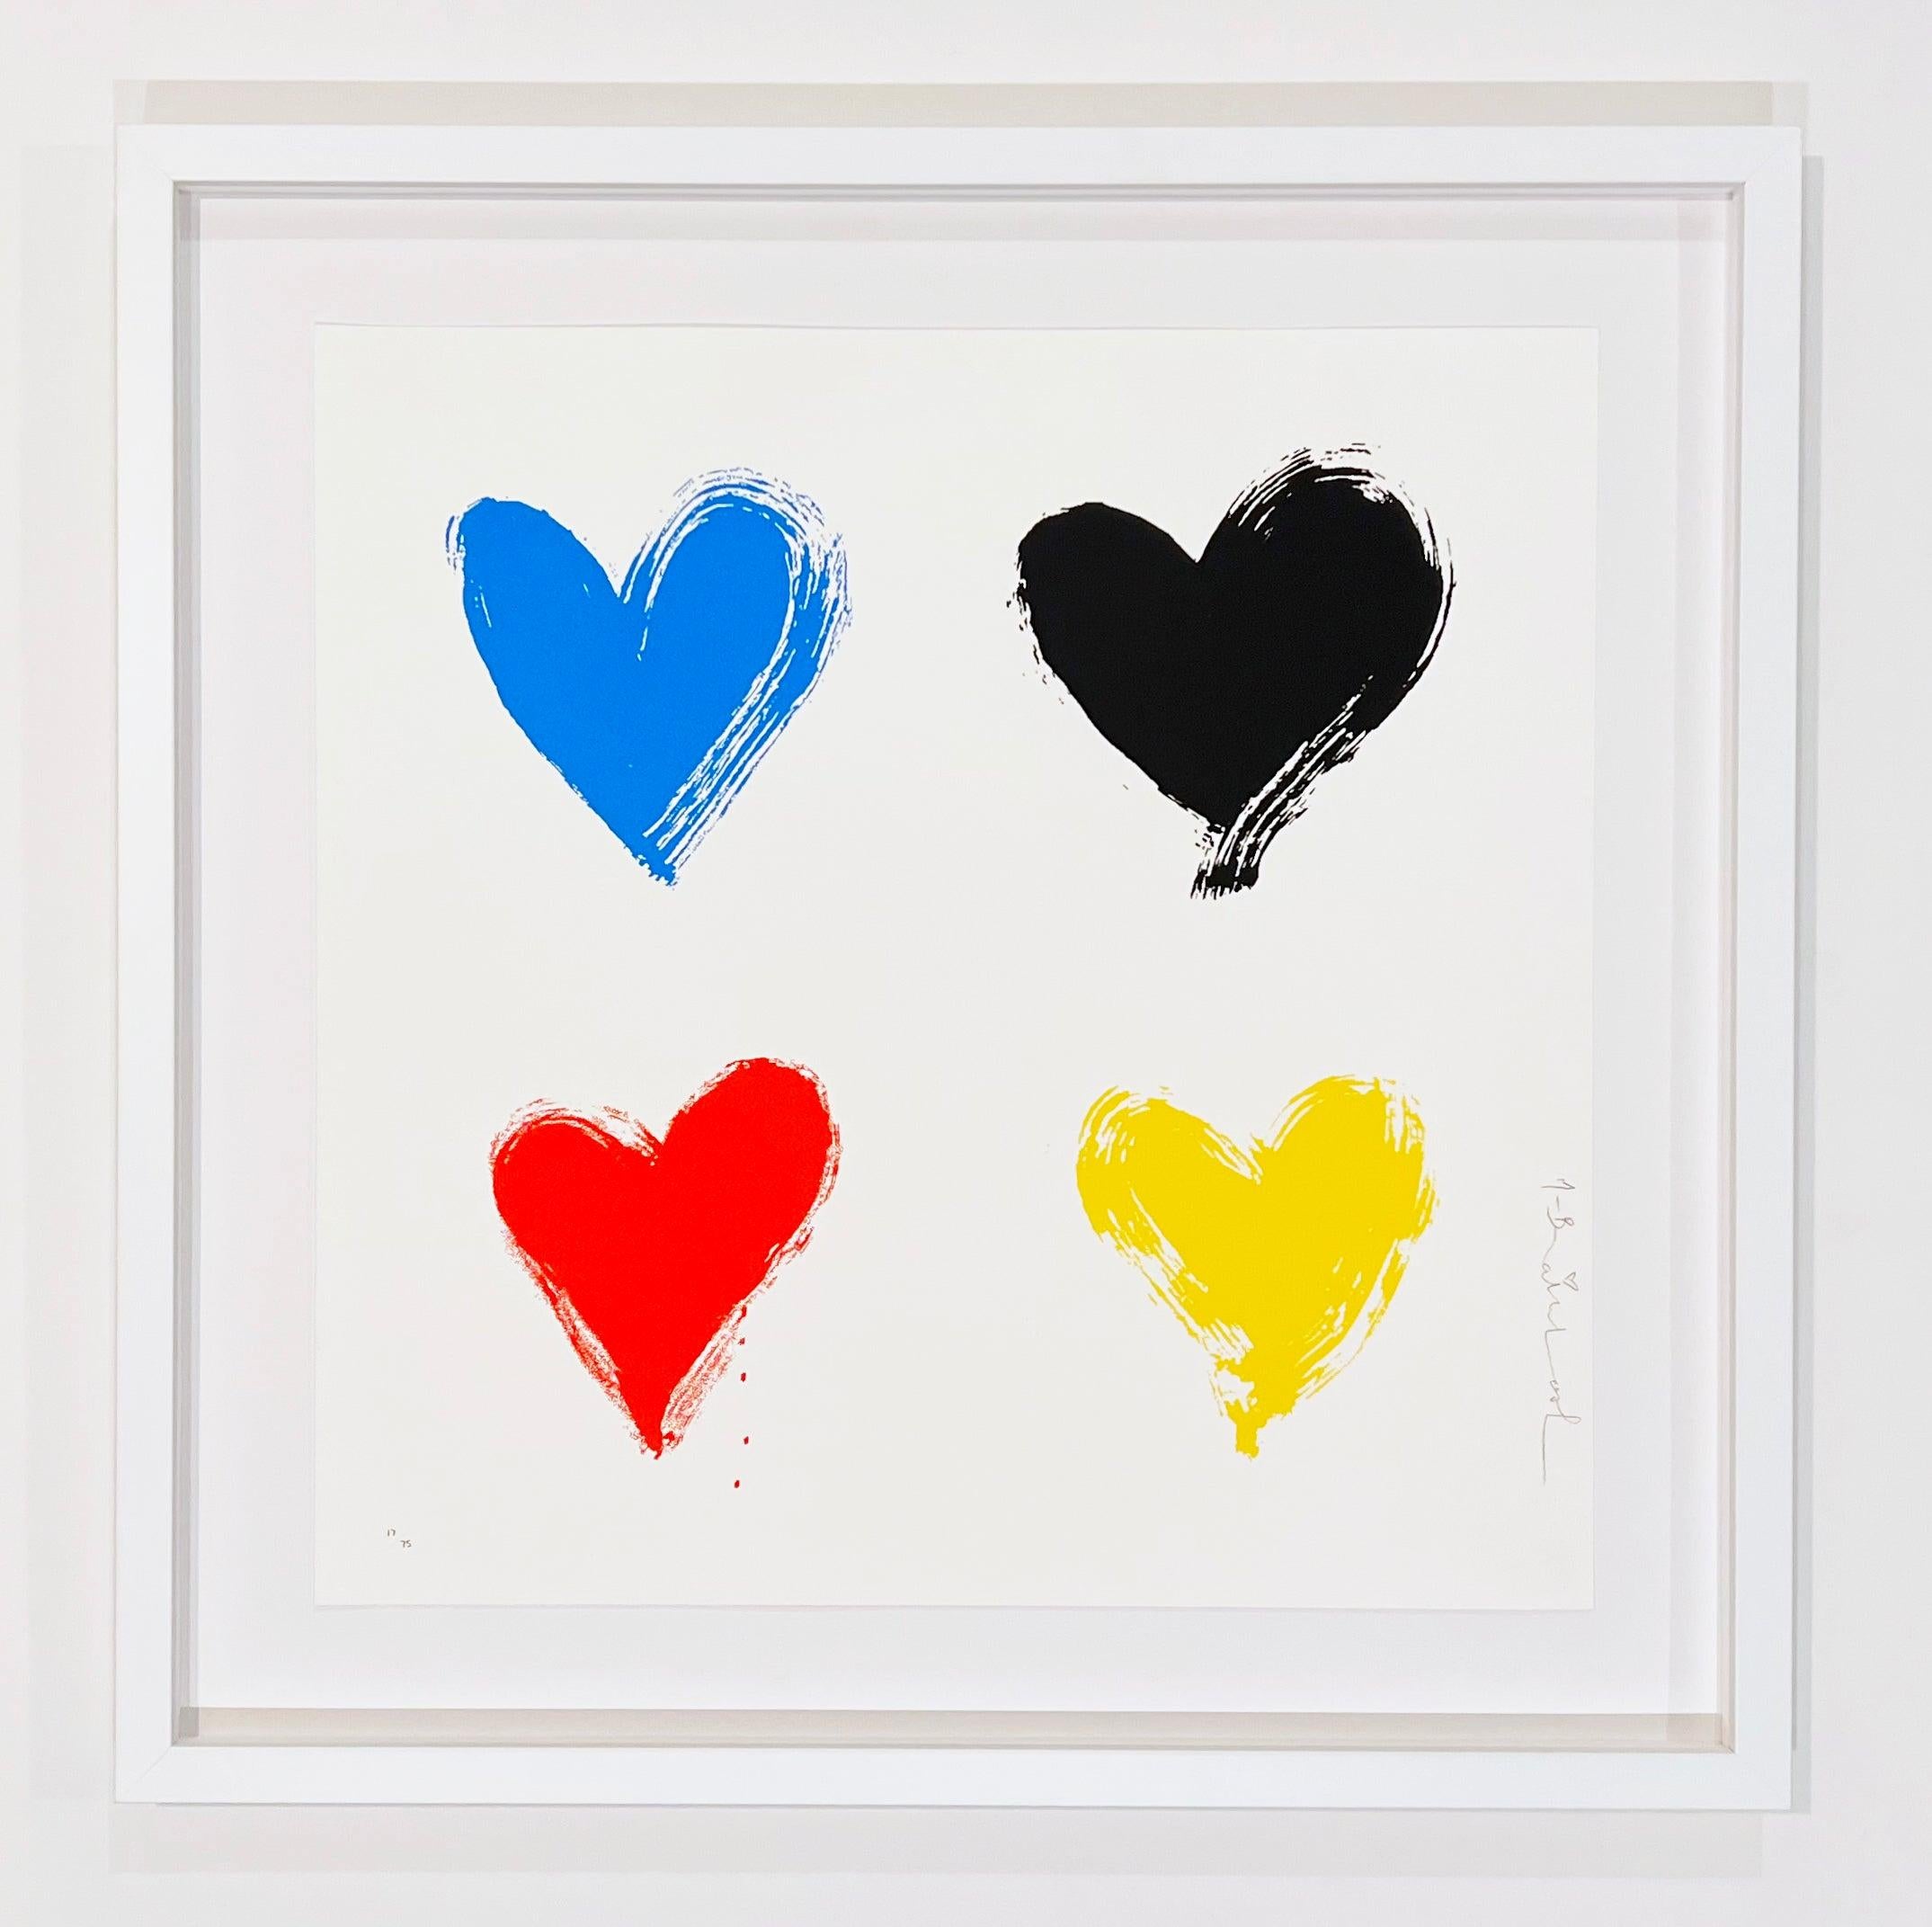 All You Need is He(Art) - Print by Mr. Brainwash